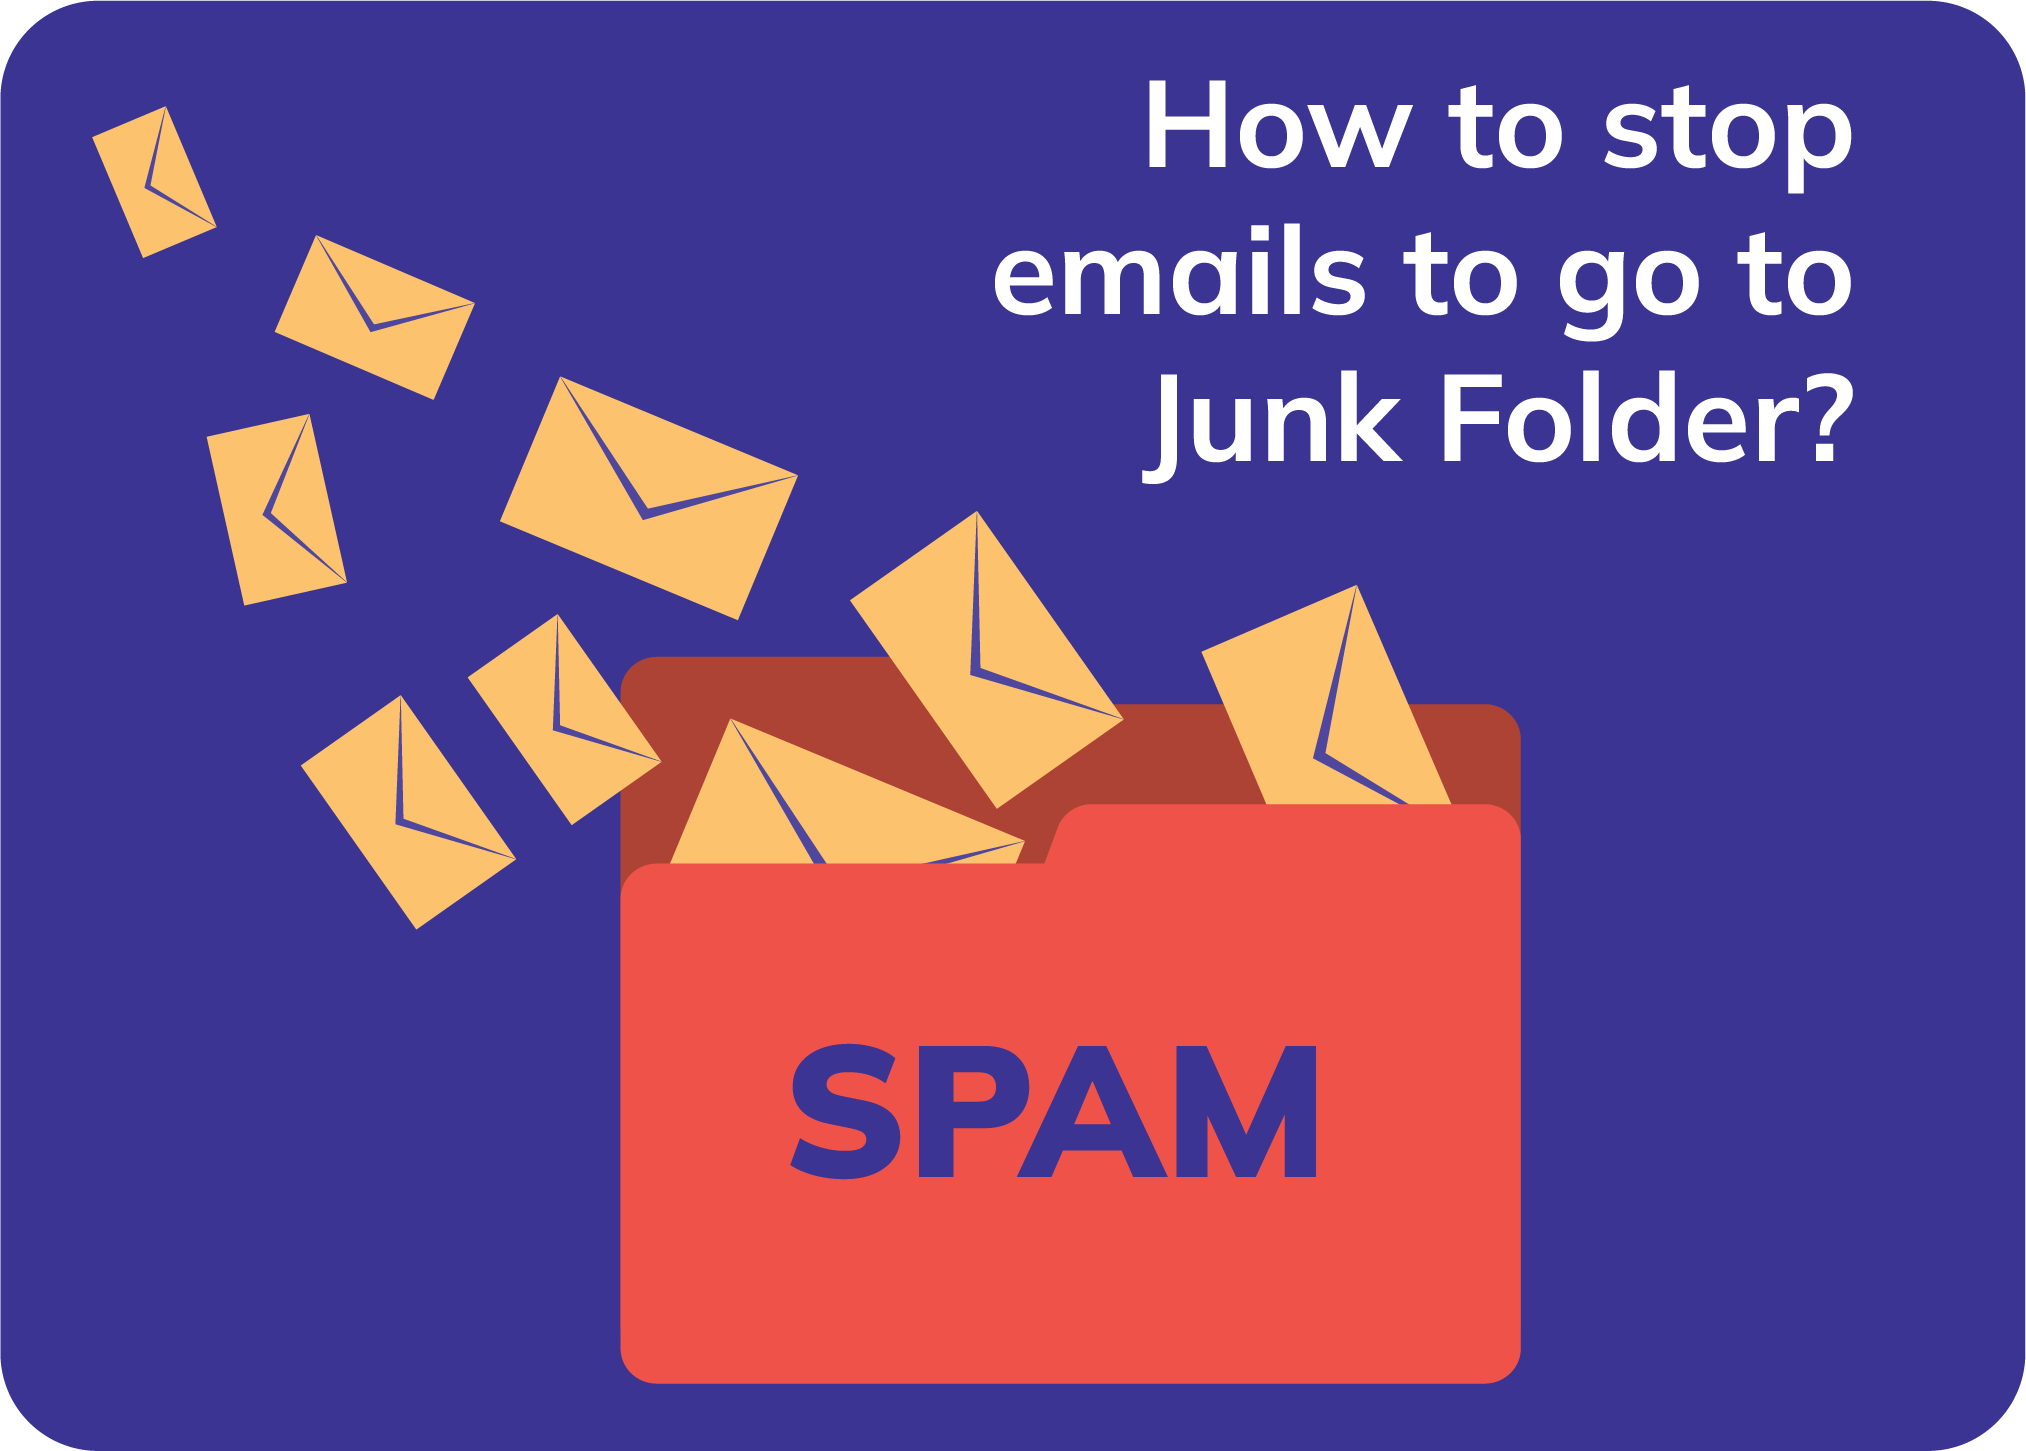 Some spam filters can mark your emails as undesired emails.